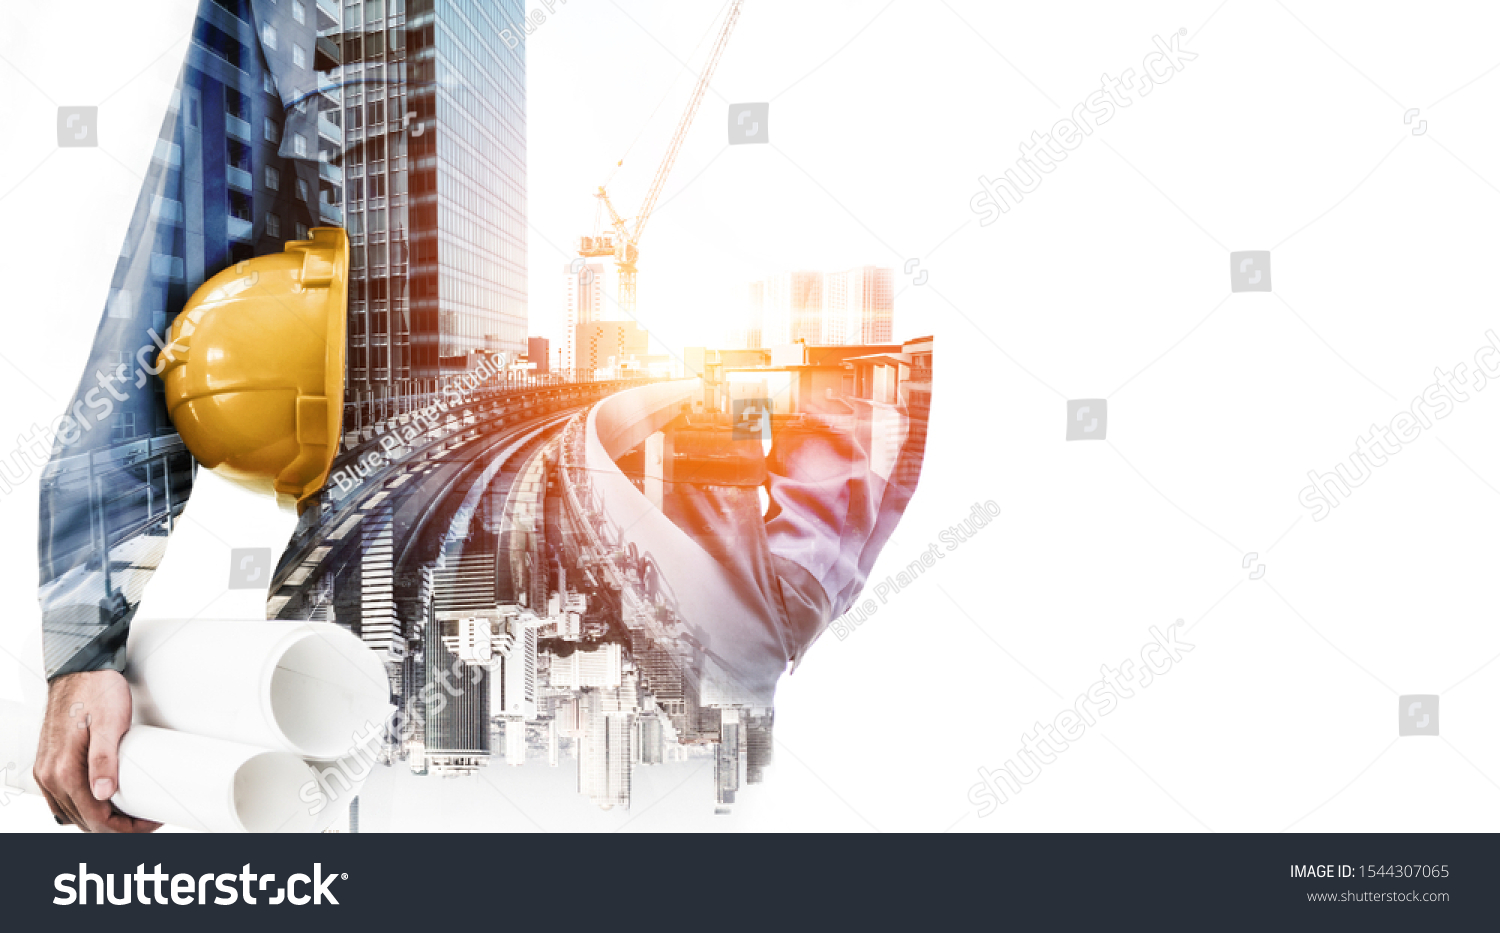 Double exposure image of construction worker holding safety helmet and construction drawing against the background of surreal construction site in the city.